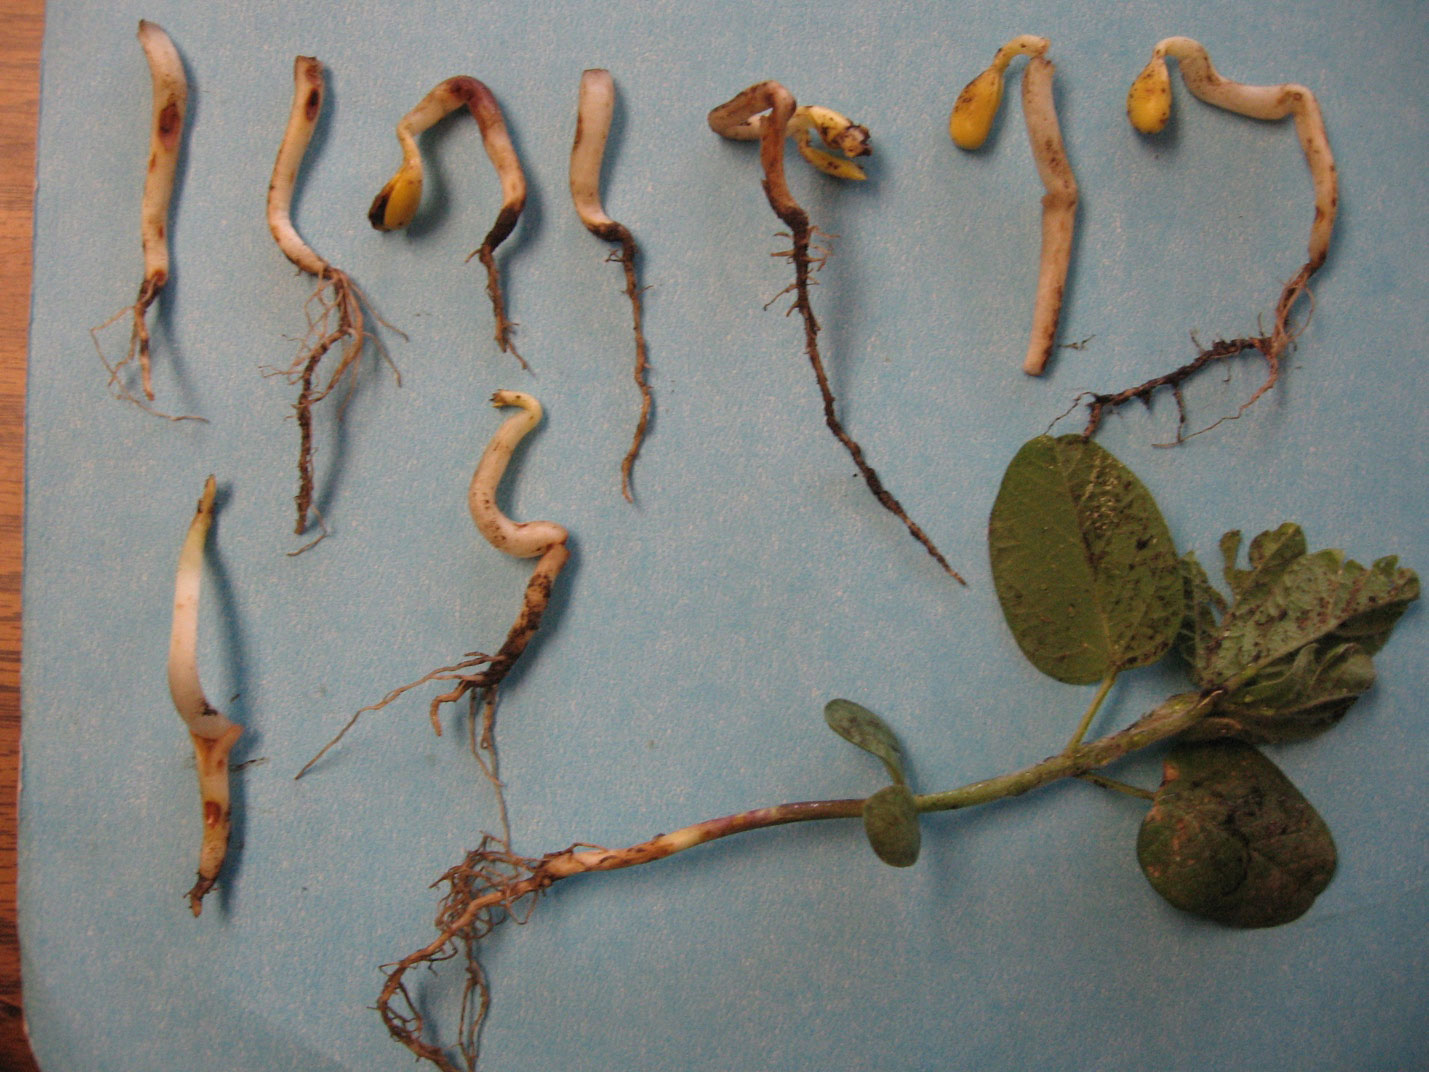 Several young soybean plants at various growth stages displayed on a tabletop..